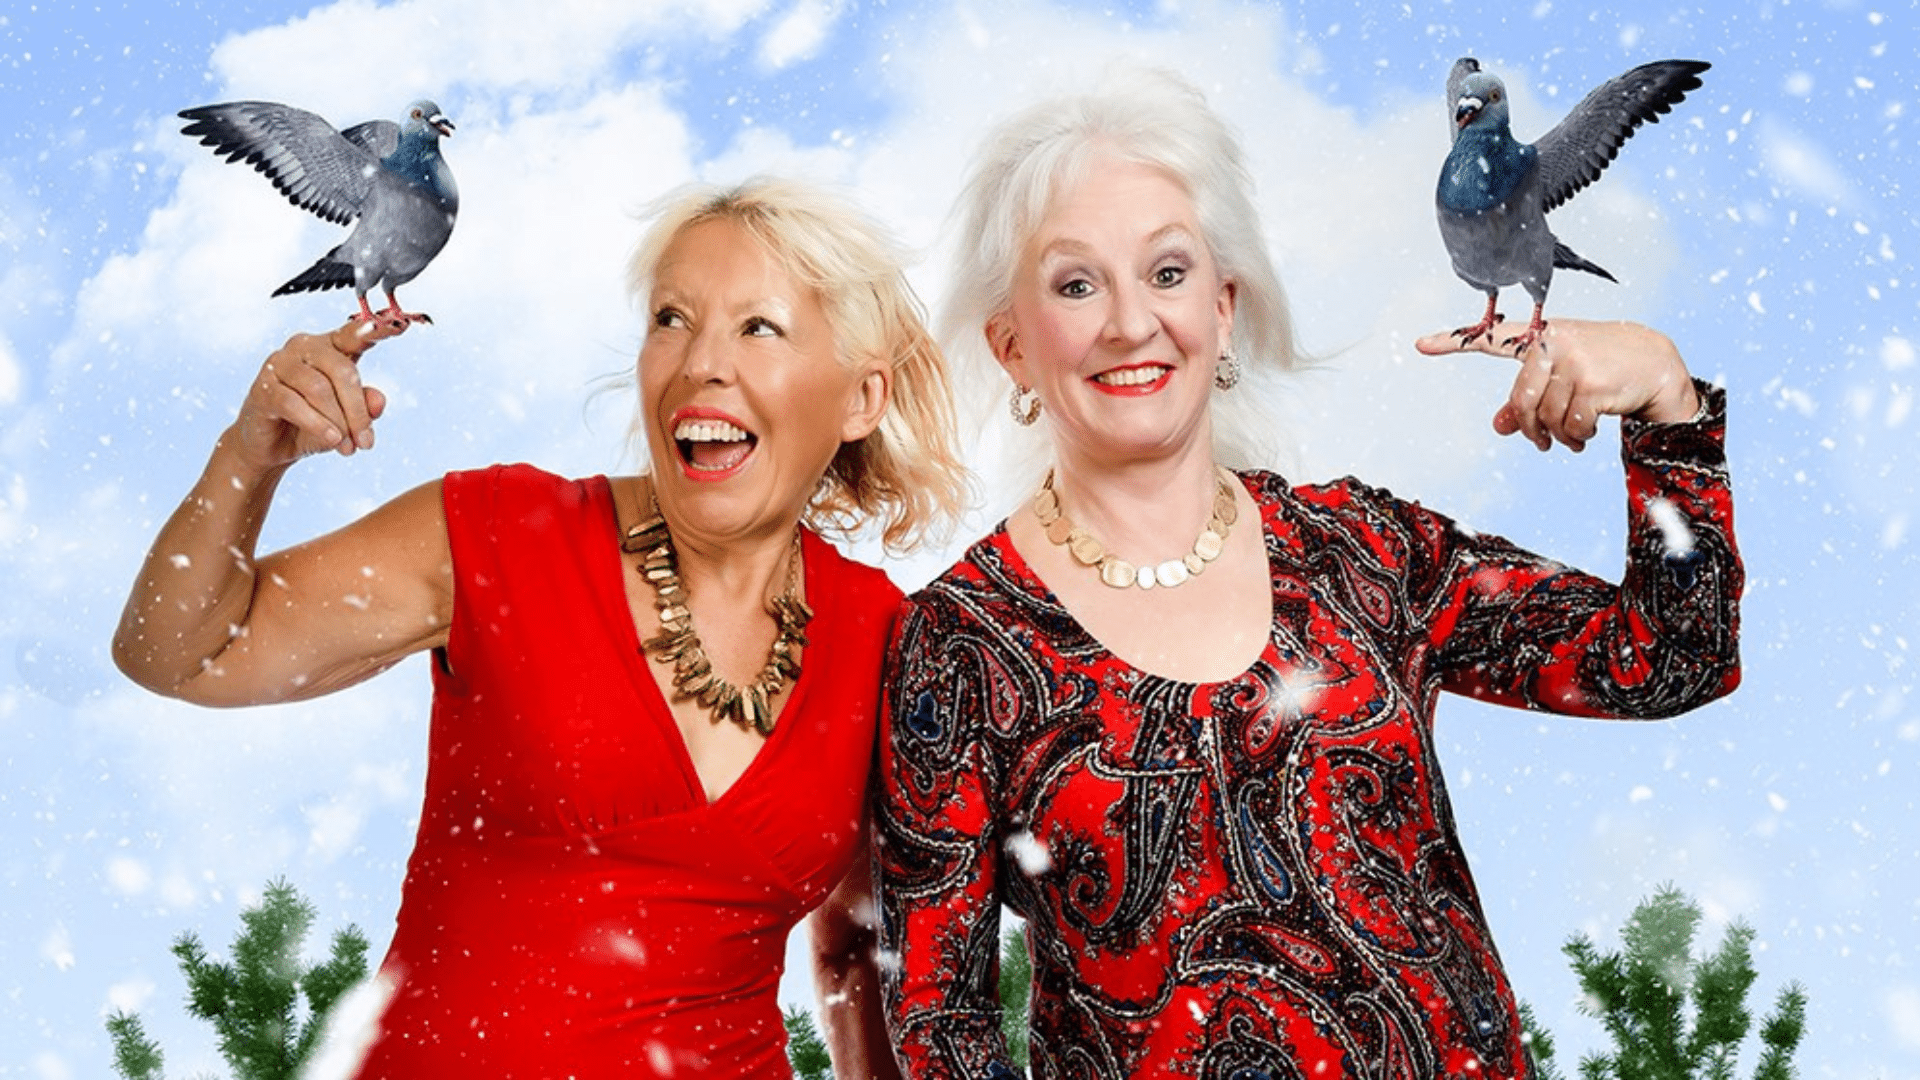 Two Turtle Doves artwork: Dillie Keane and Barb Jungr both wear red dresses and gold necklaces and smile. They each have a turtle dove perched on their hand.